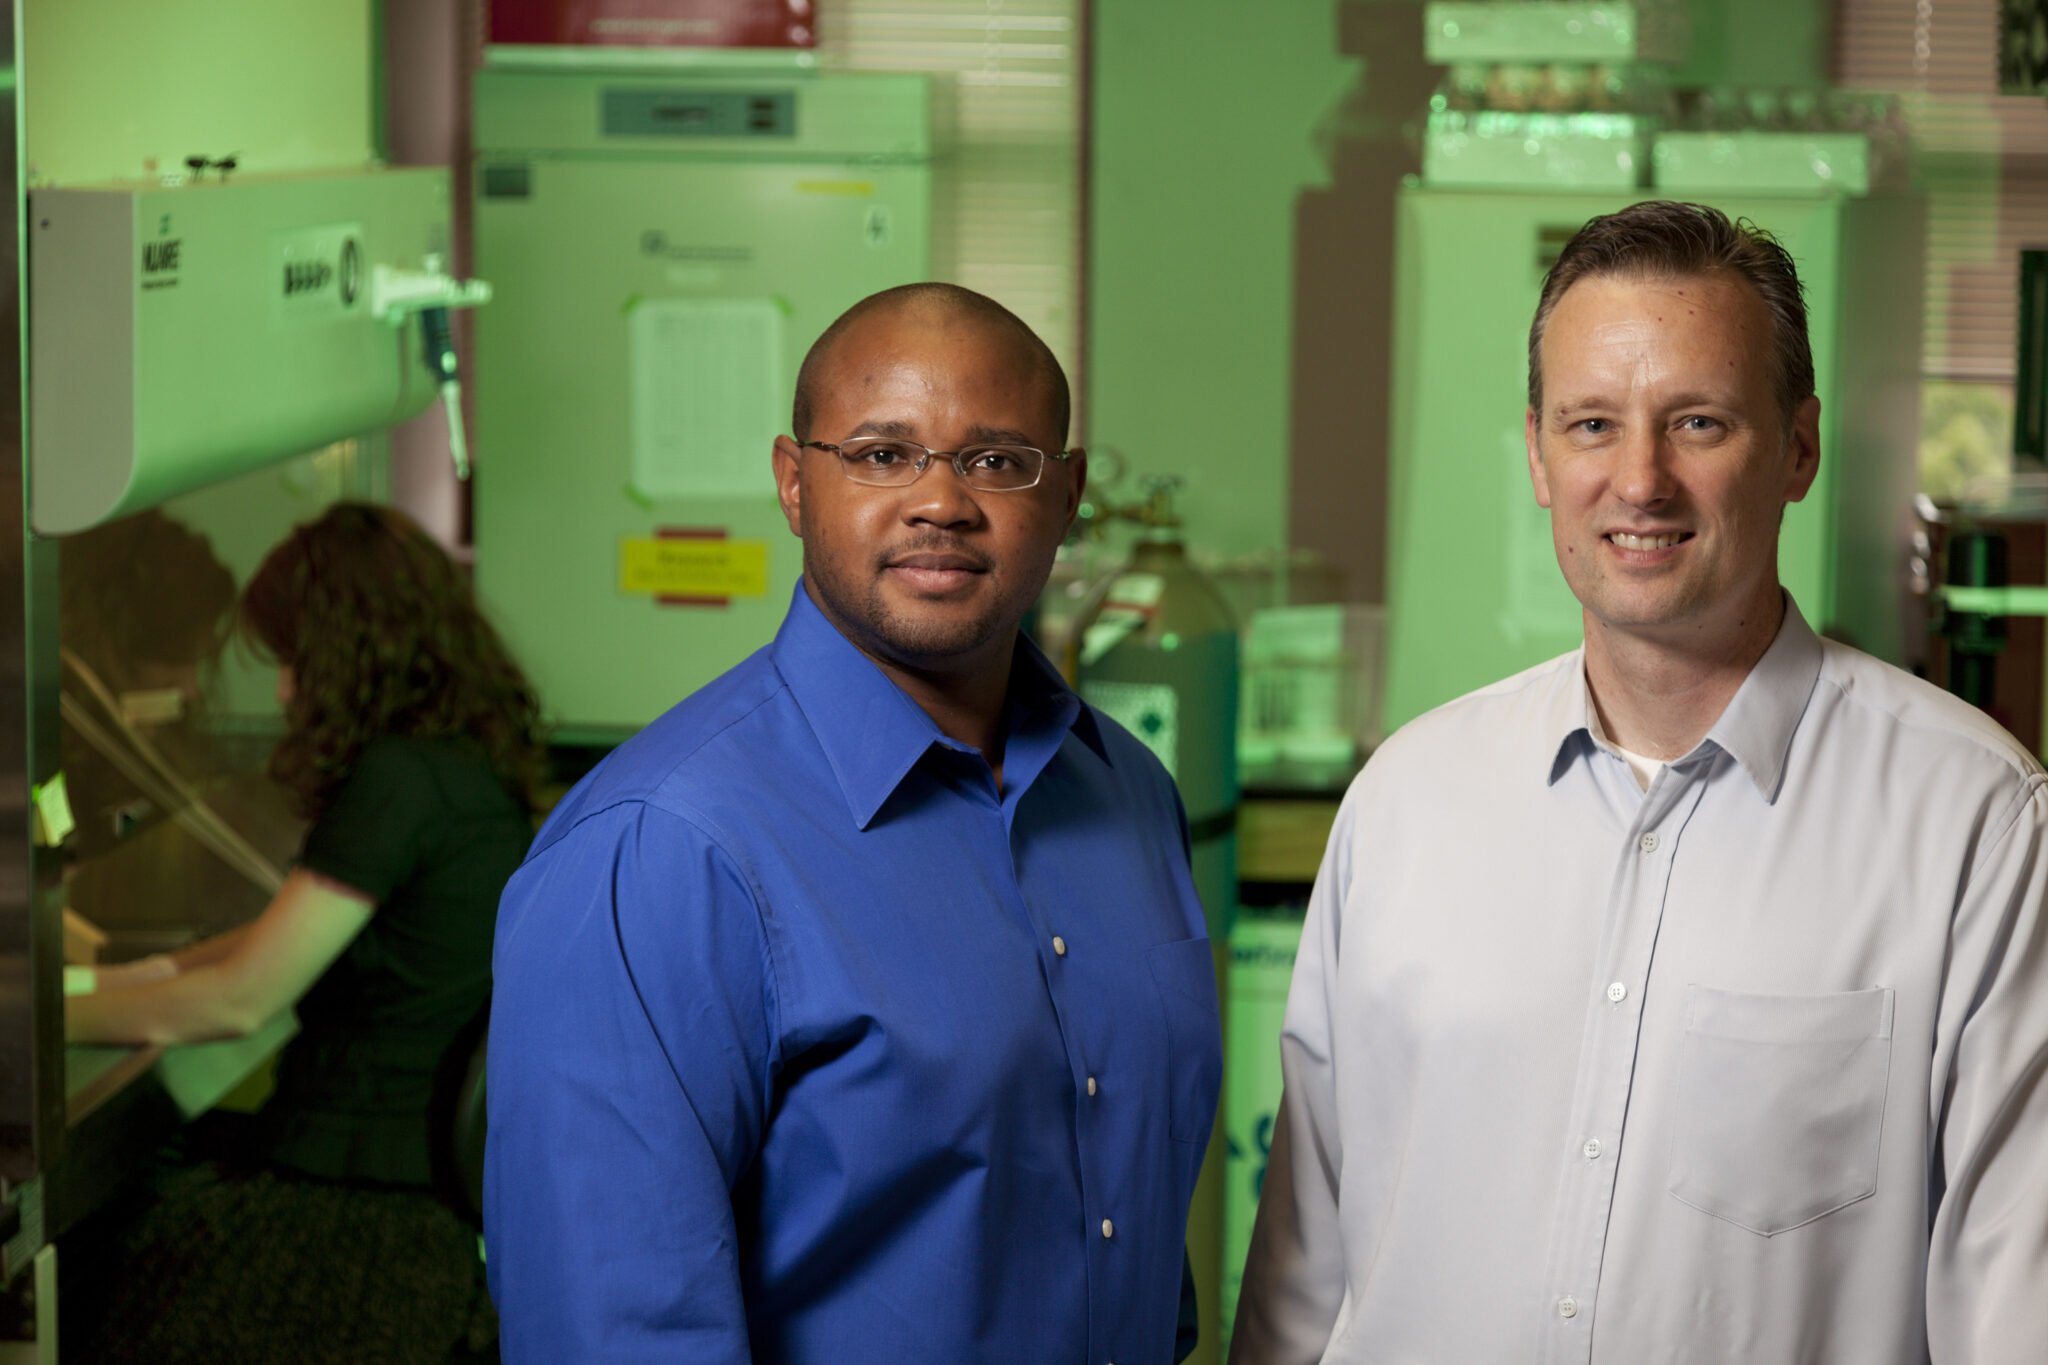 Franklin West (left) and Steven Stice of UGA’s Regenerative Bioscience Center have received $1.1 million in grants from the National Institutes of Health to study potential treatments for traumatic brain injury.